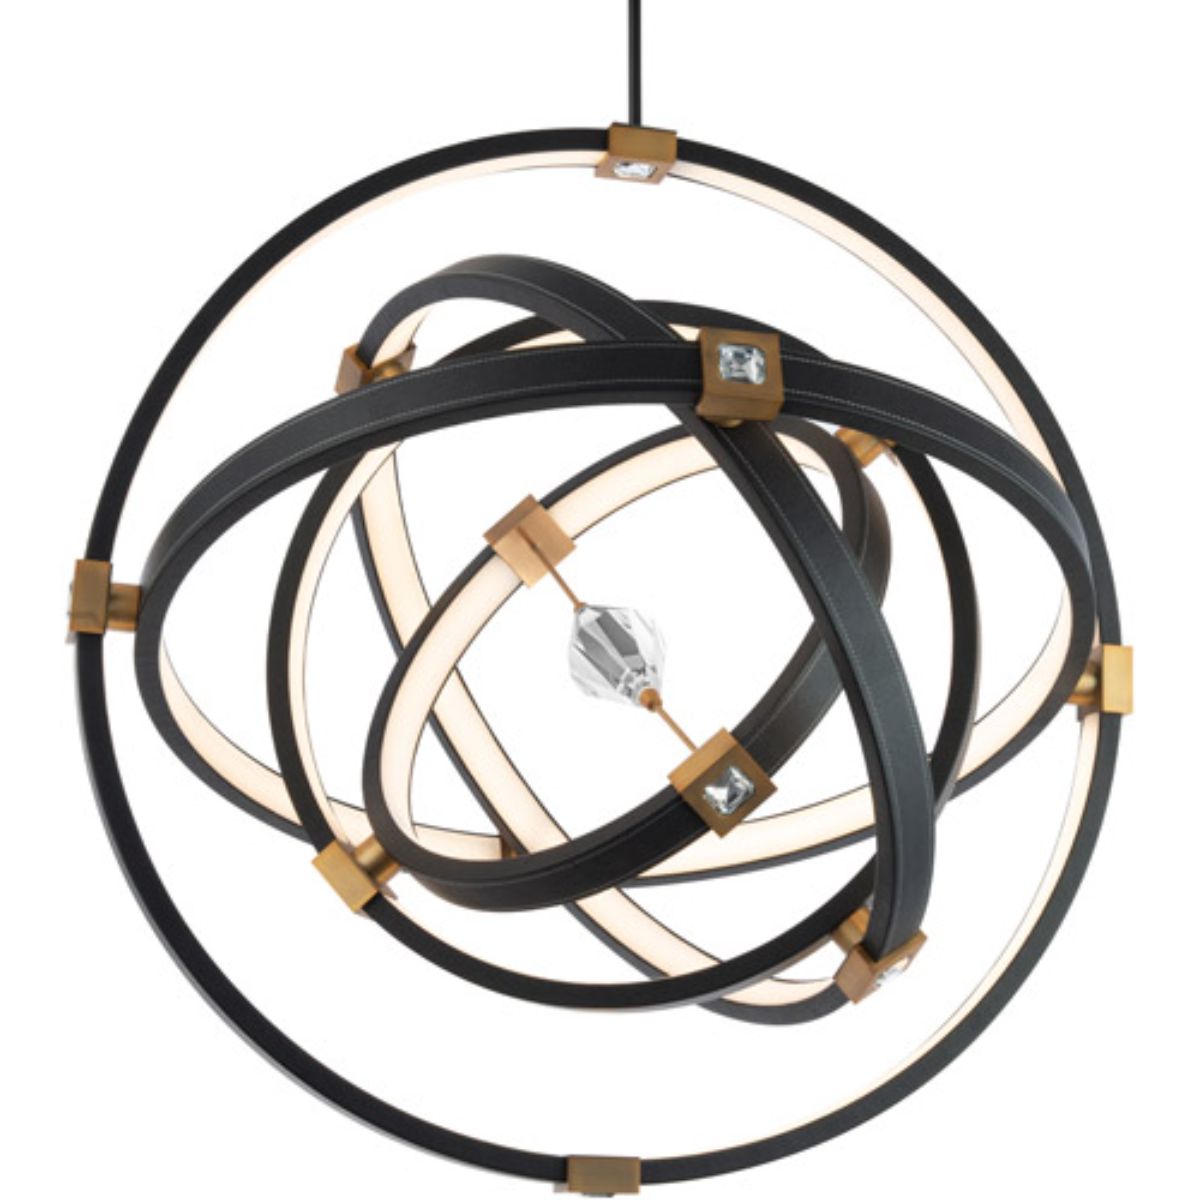 Atomic 36 in. LED Pendant Light Selectable CCTBlack & Brushed Nickel Finish